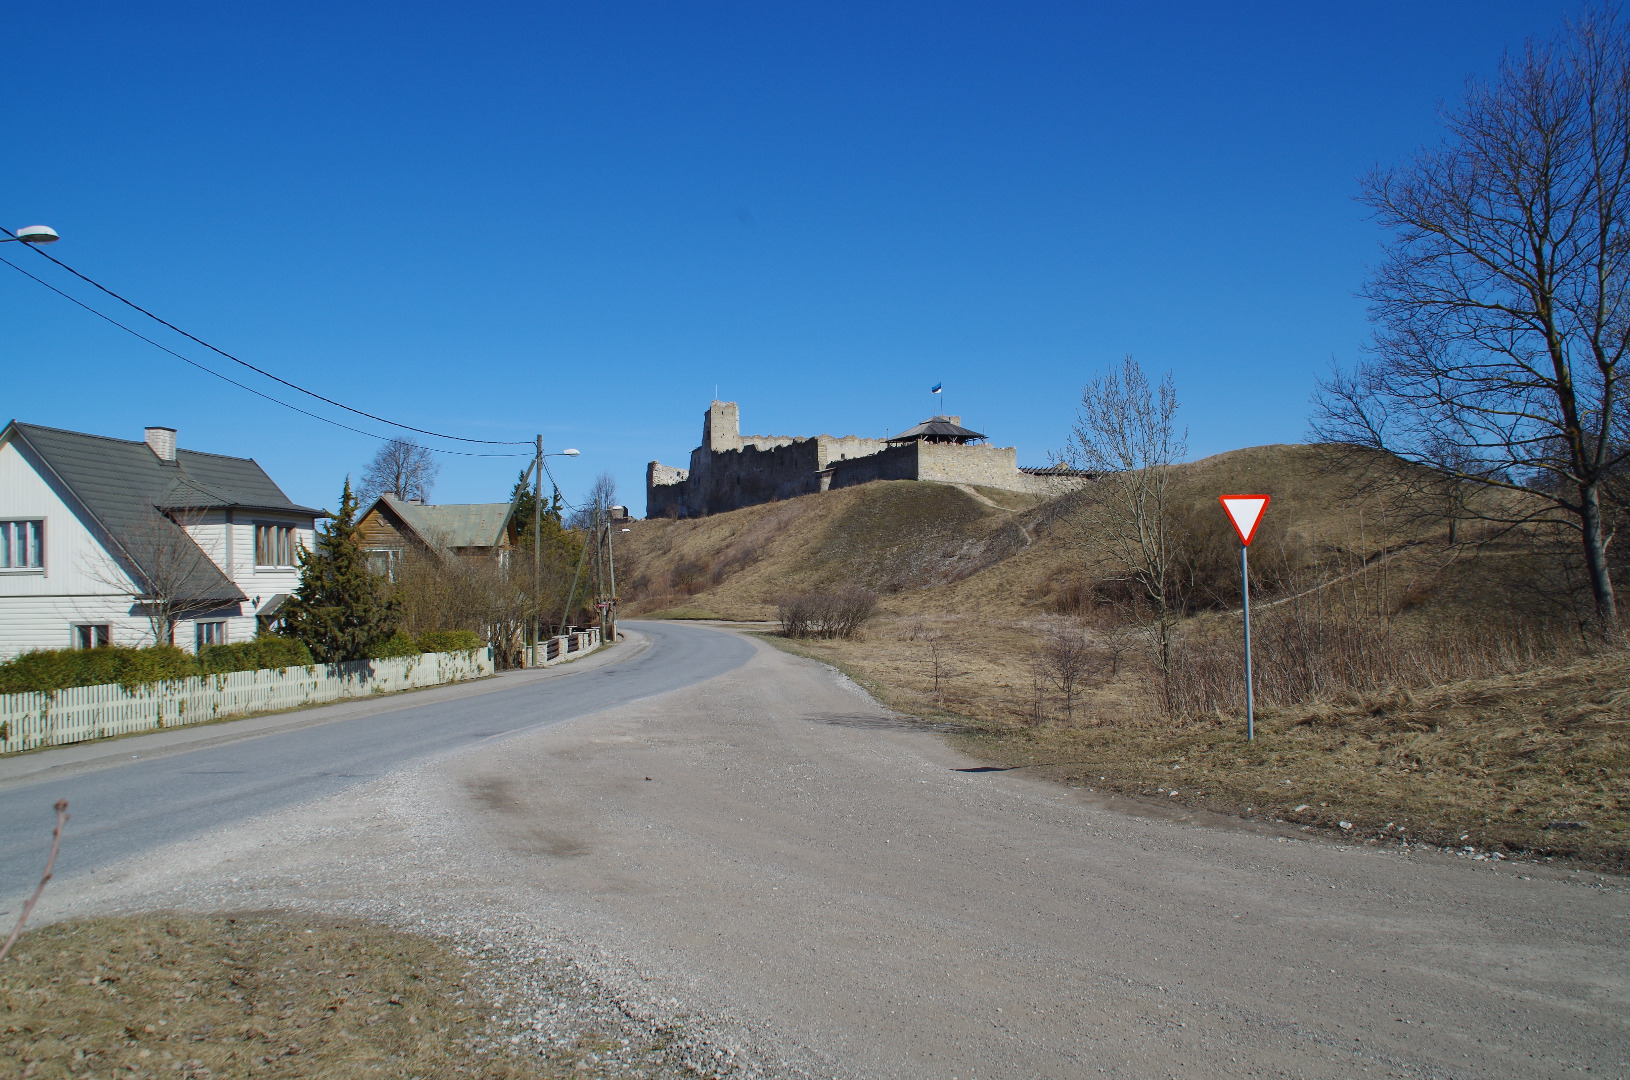 Rein Tiik and Watch Road Trail in the background of Rakvere ordinance rephoto